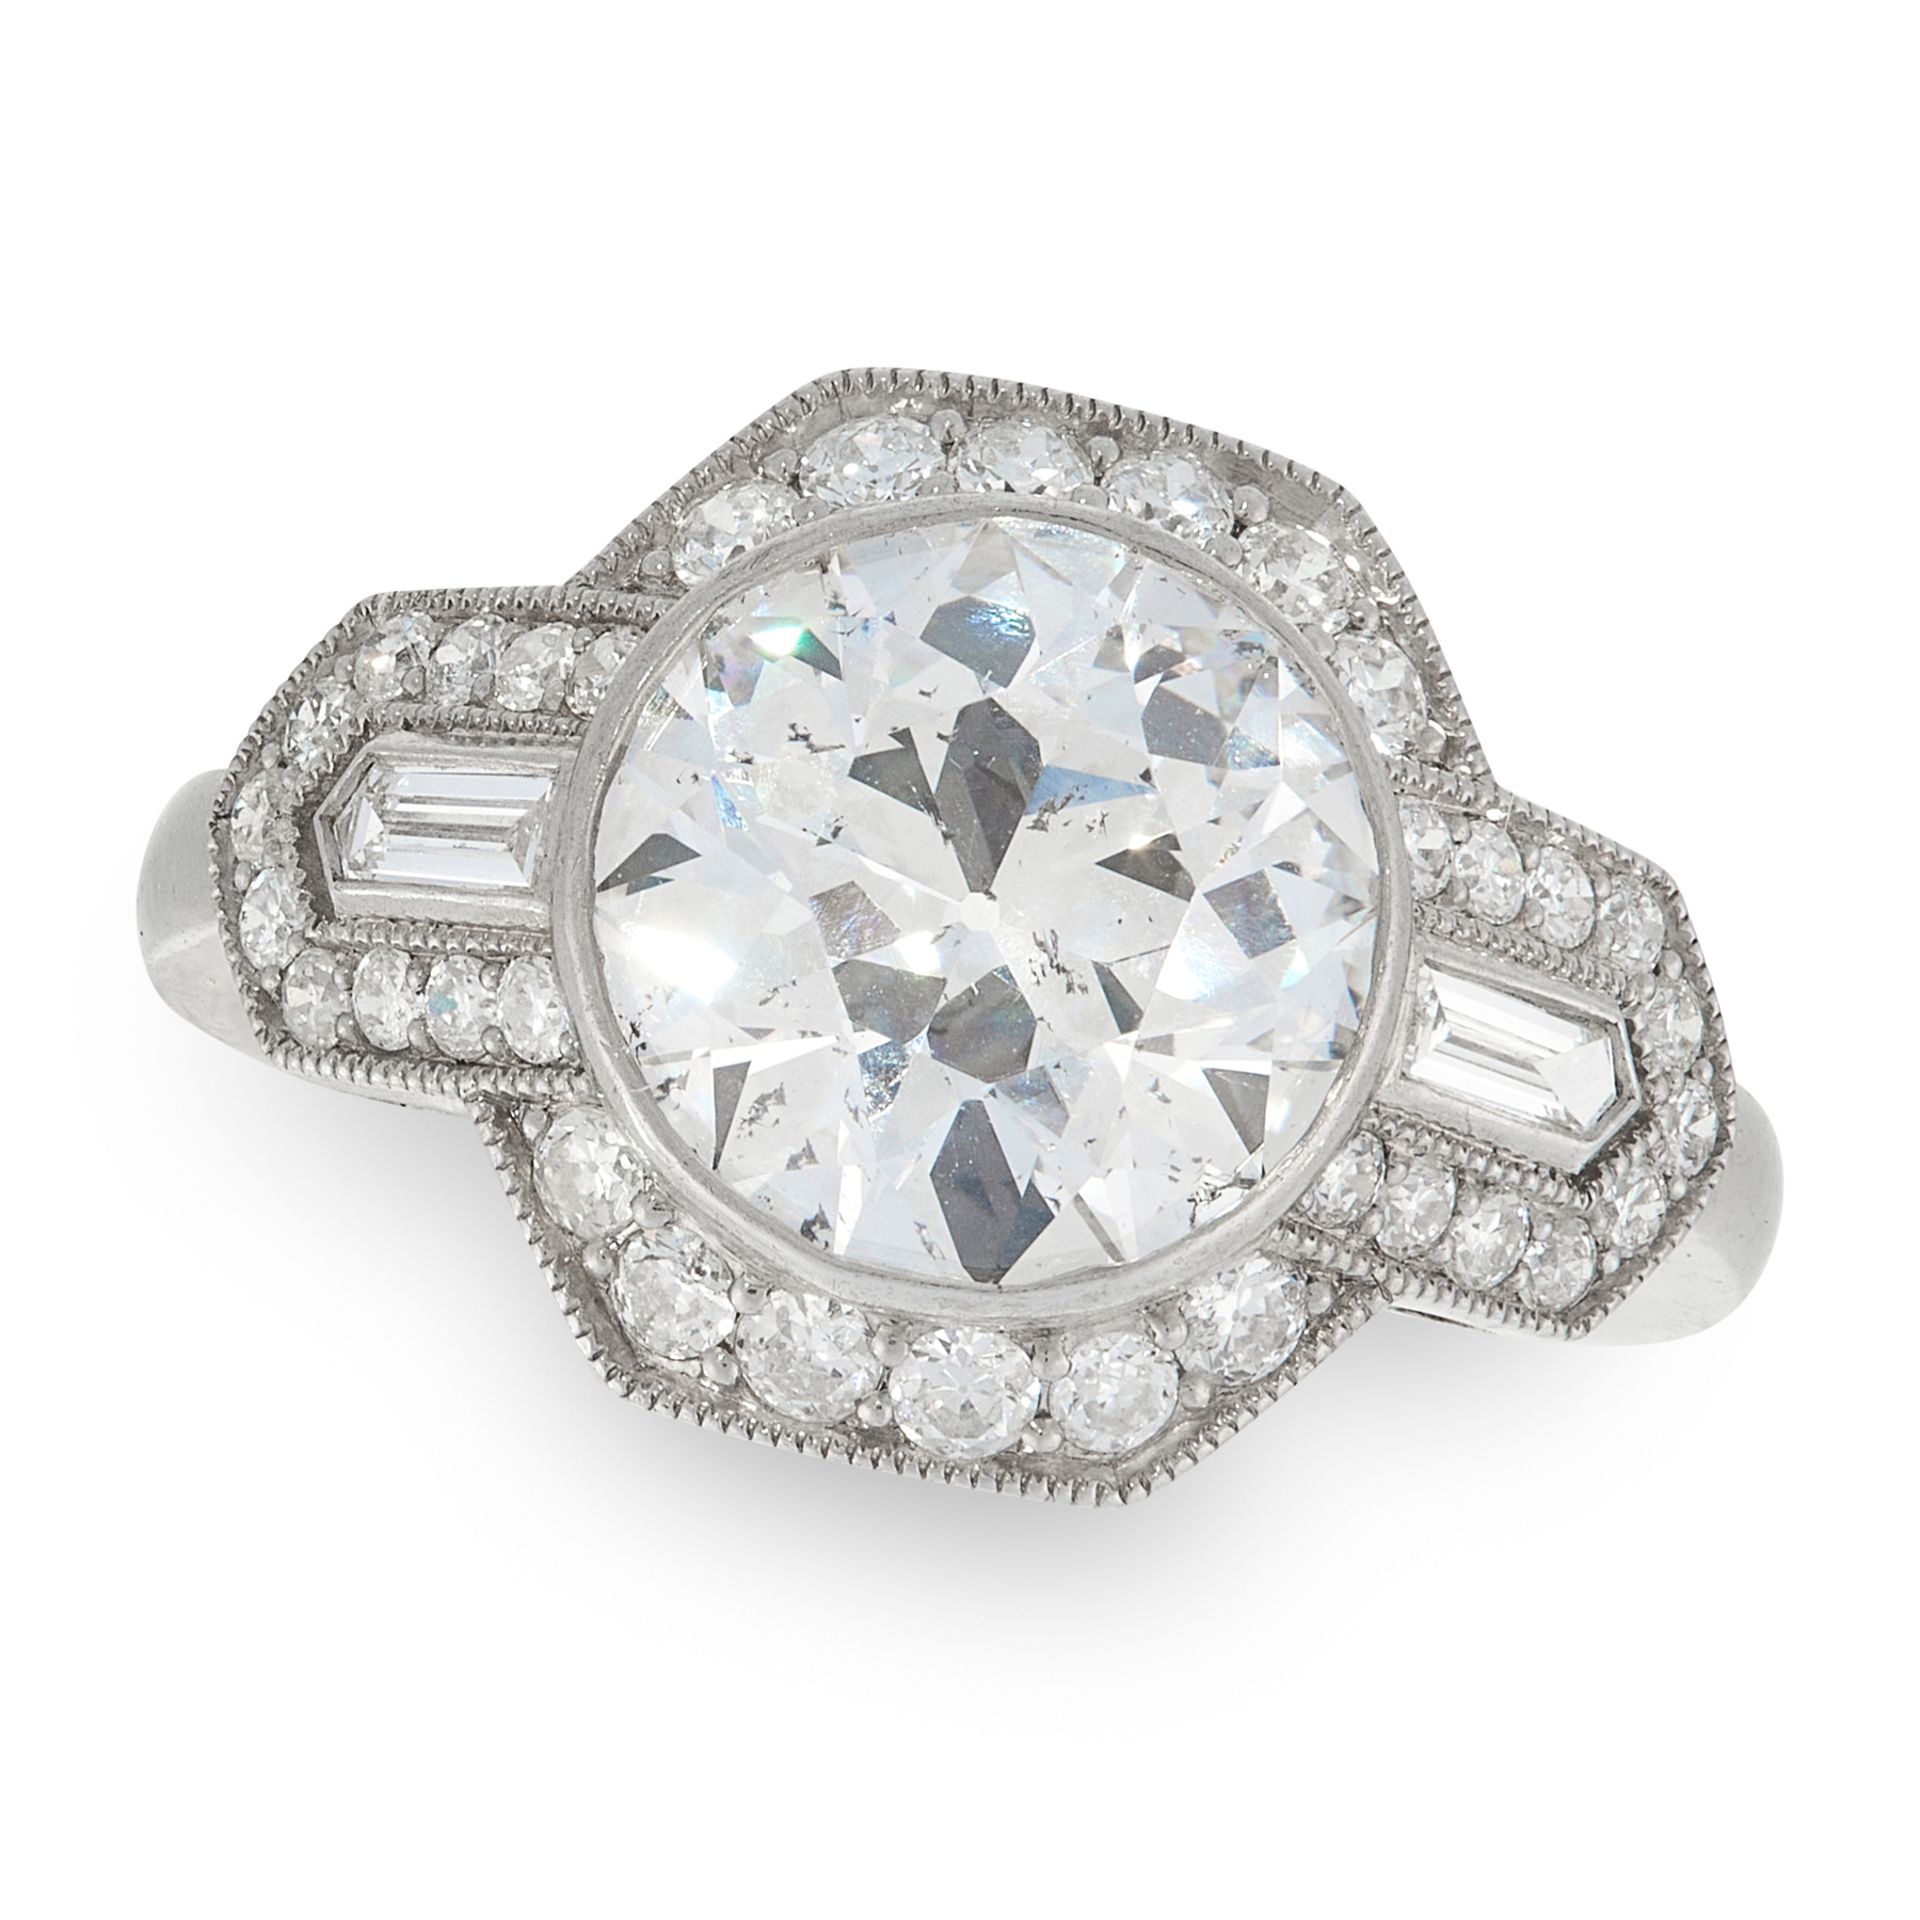 A DIAMOND DRESS RING in platinum, set with a principal round cut diamond of 3.01 carats flanked by